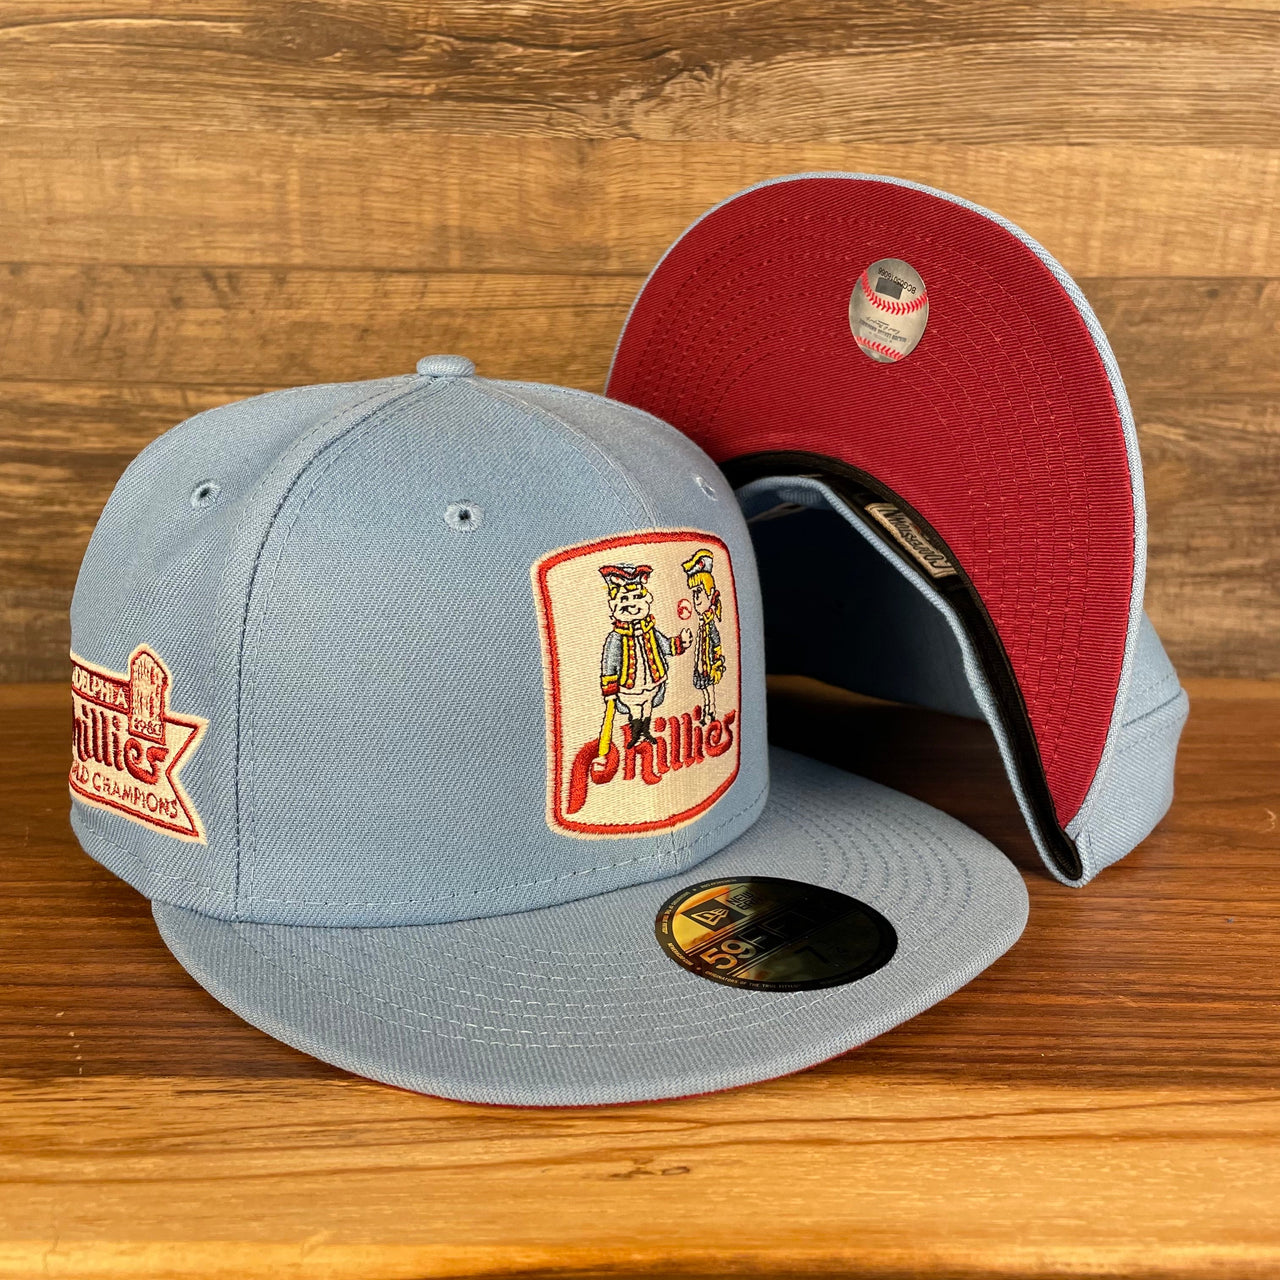 Philadelphia Phillies 1980 World Champions Side Patch Cooperstown Quaker Logo Maroon Bottom Sky 59Fifty Fitted Cap